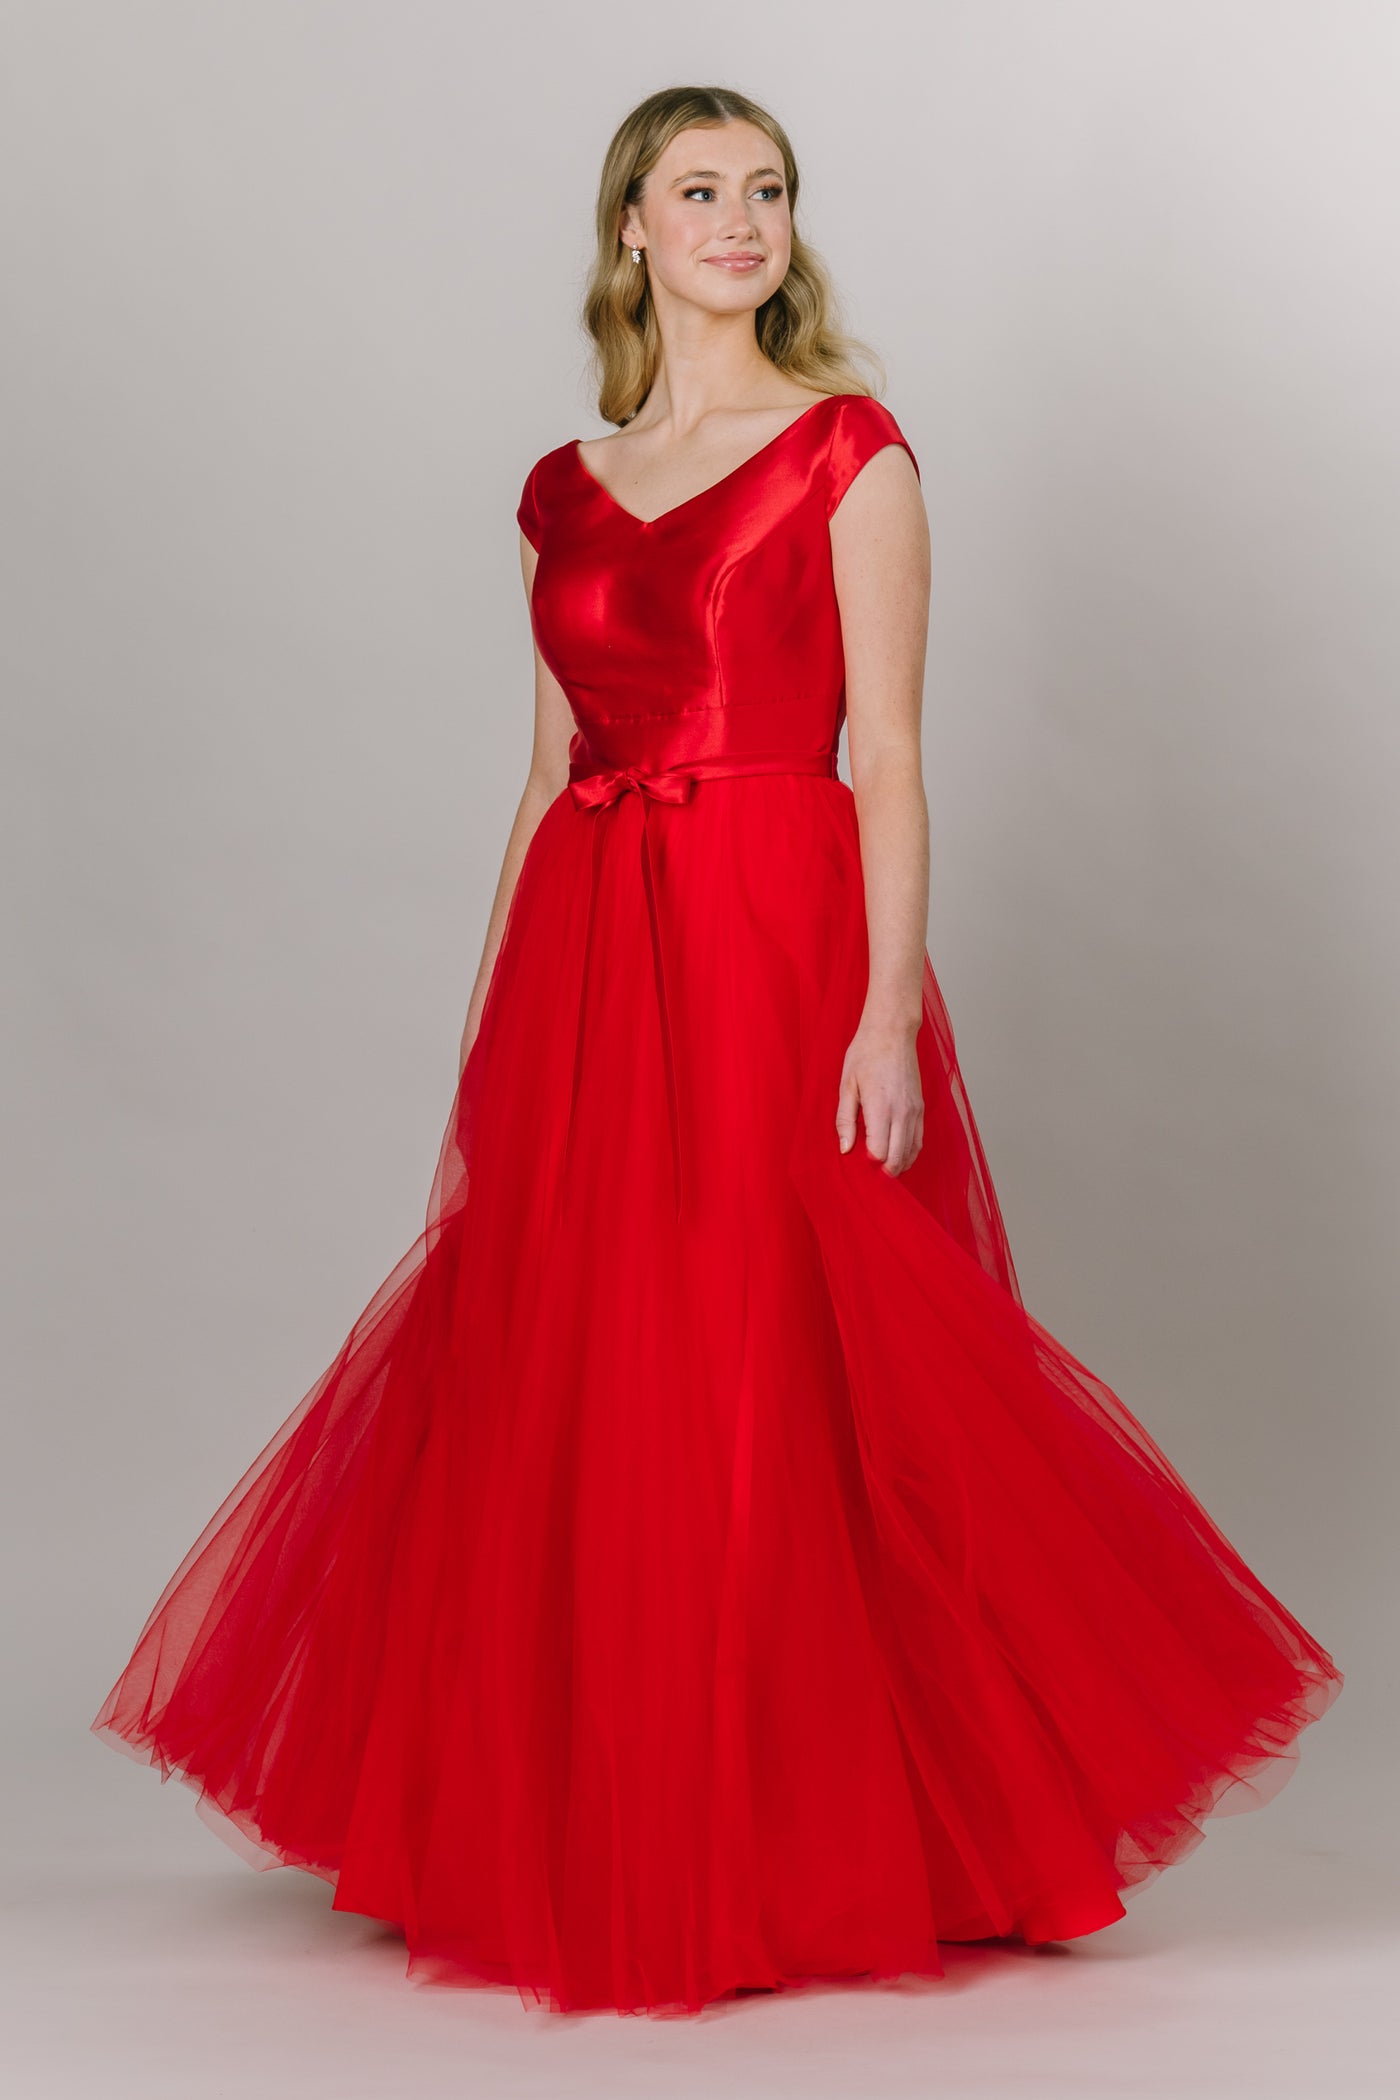 Modest Dresses - Modest Prom Dress - Formalwear Modest Dresses - Bridesmaid Modest Dresses. Red ballgown with a v neckline and cap sleeves and a bow belt and tulle bottom